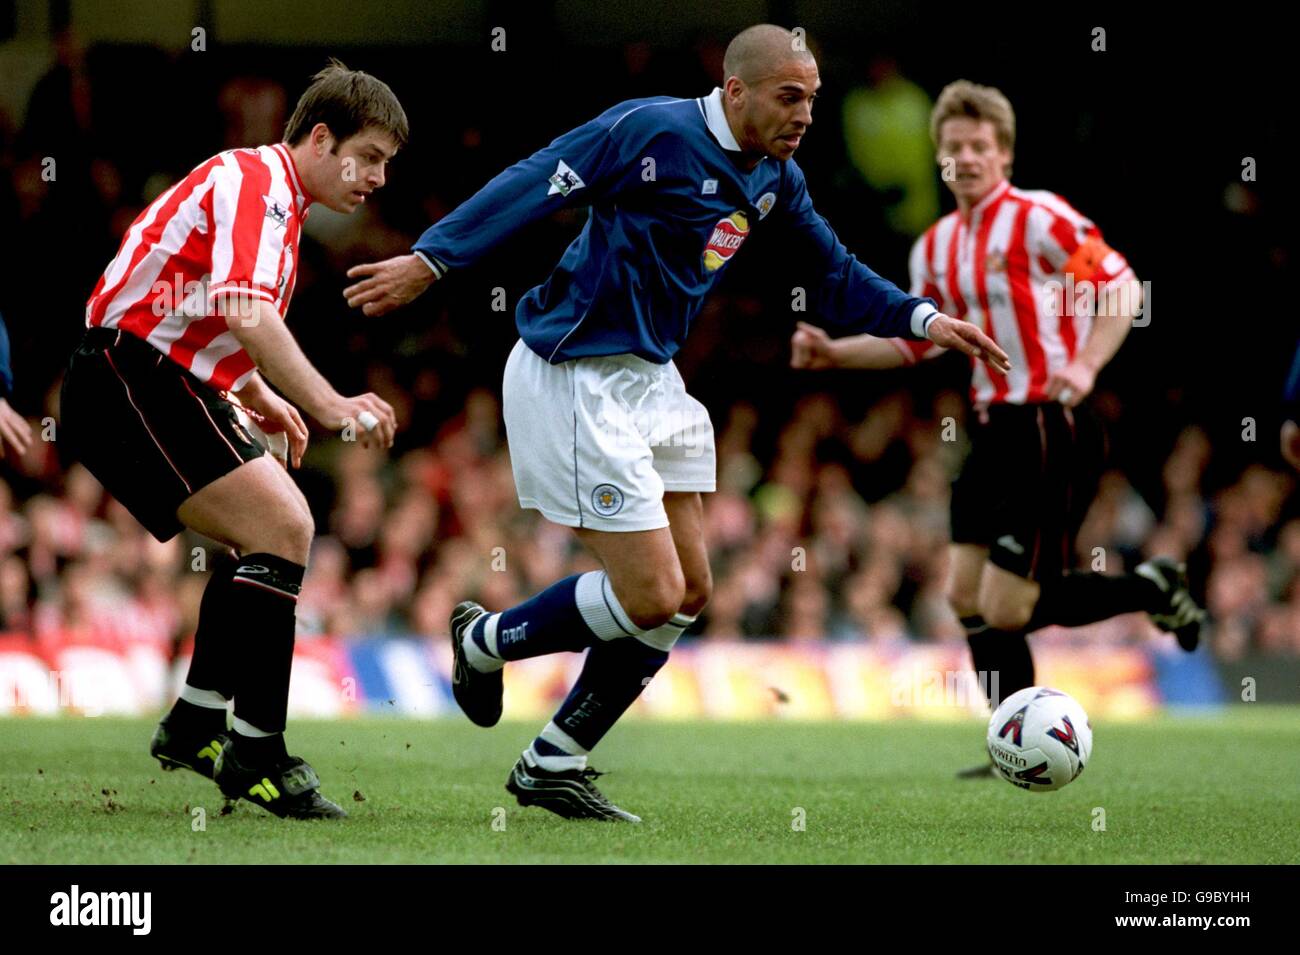 Soccer - FA Carling Premiership - Leicester City v Sunderland. Leicester City's Stan Collymore (r) holds off Sunderland's Paul Butler (l) Stock Photo